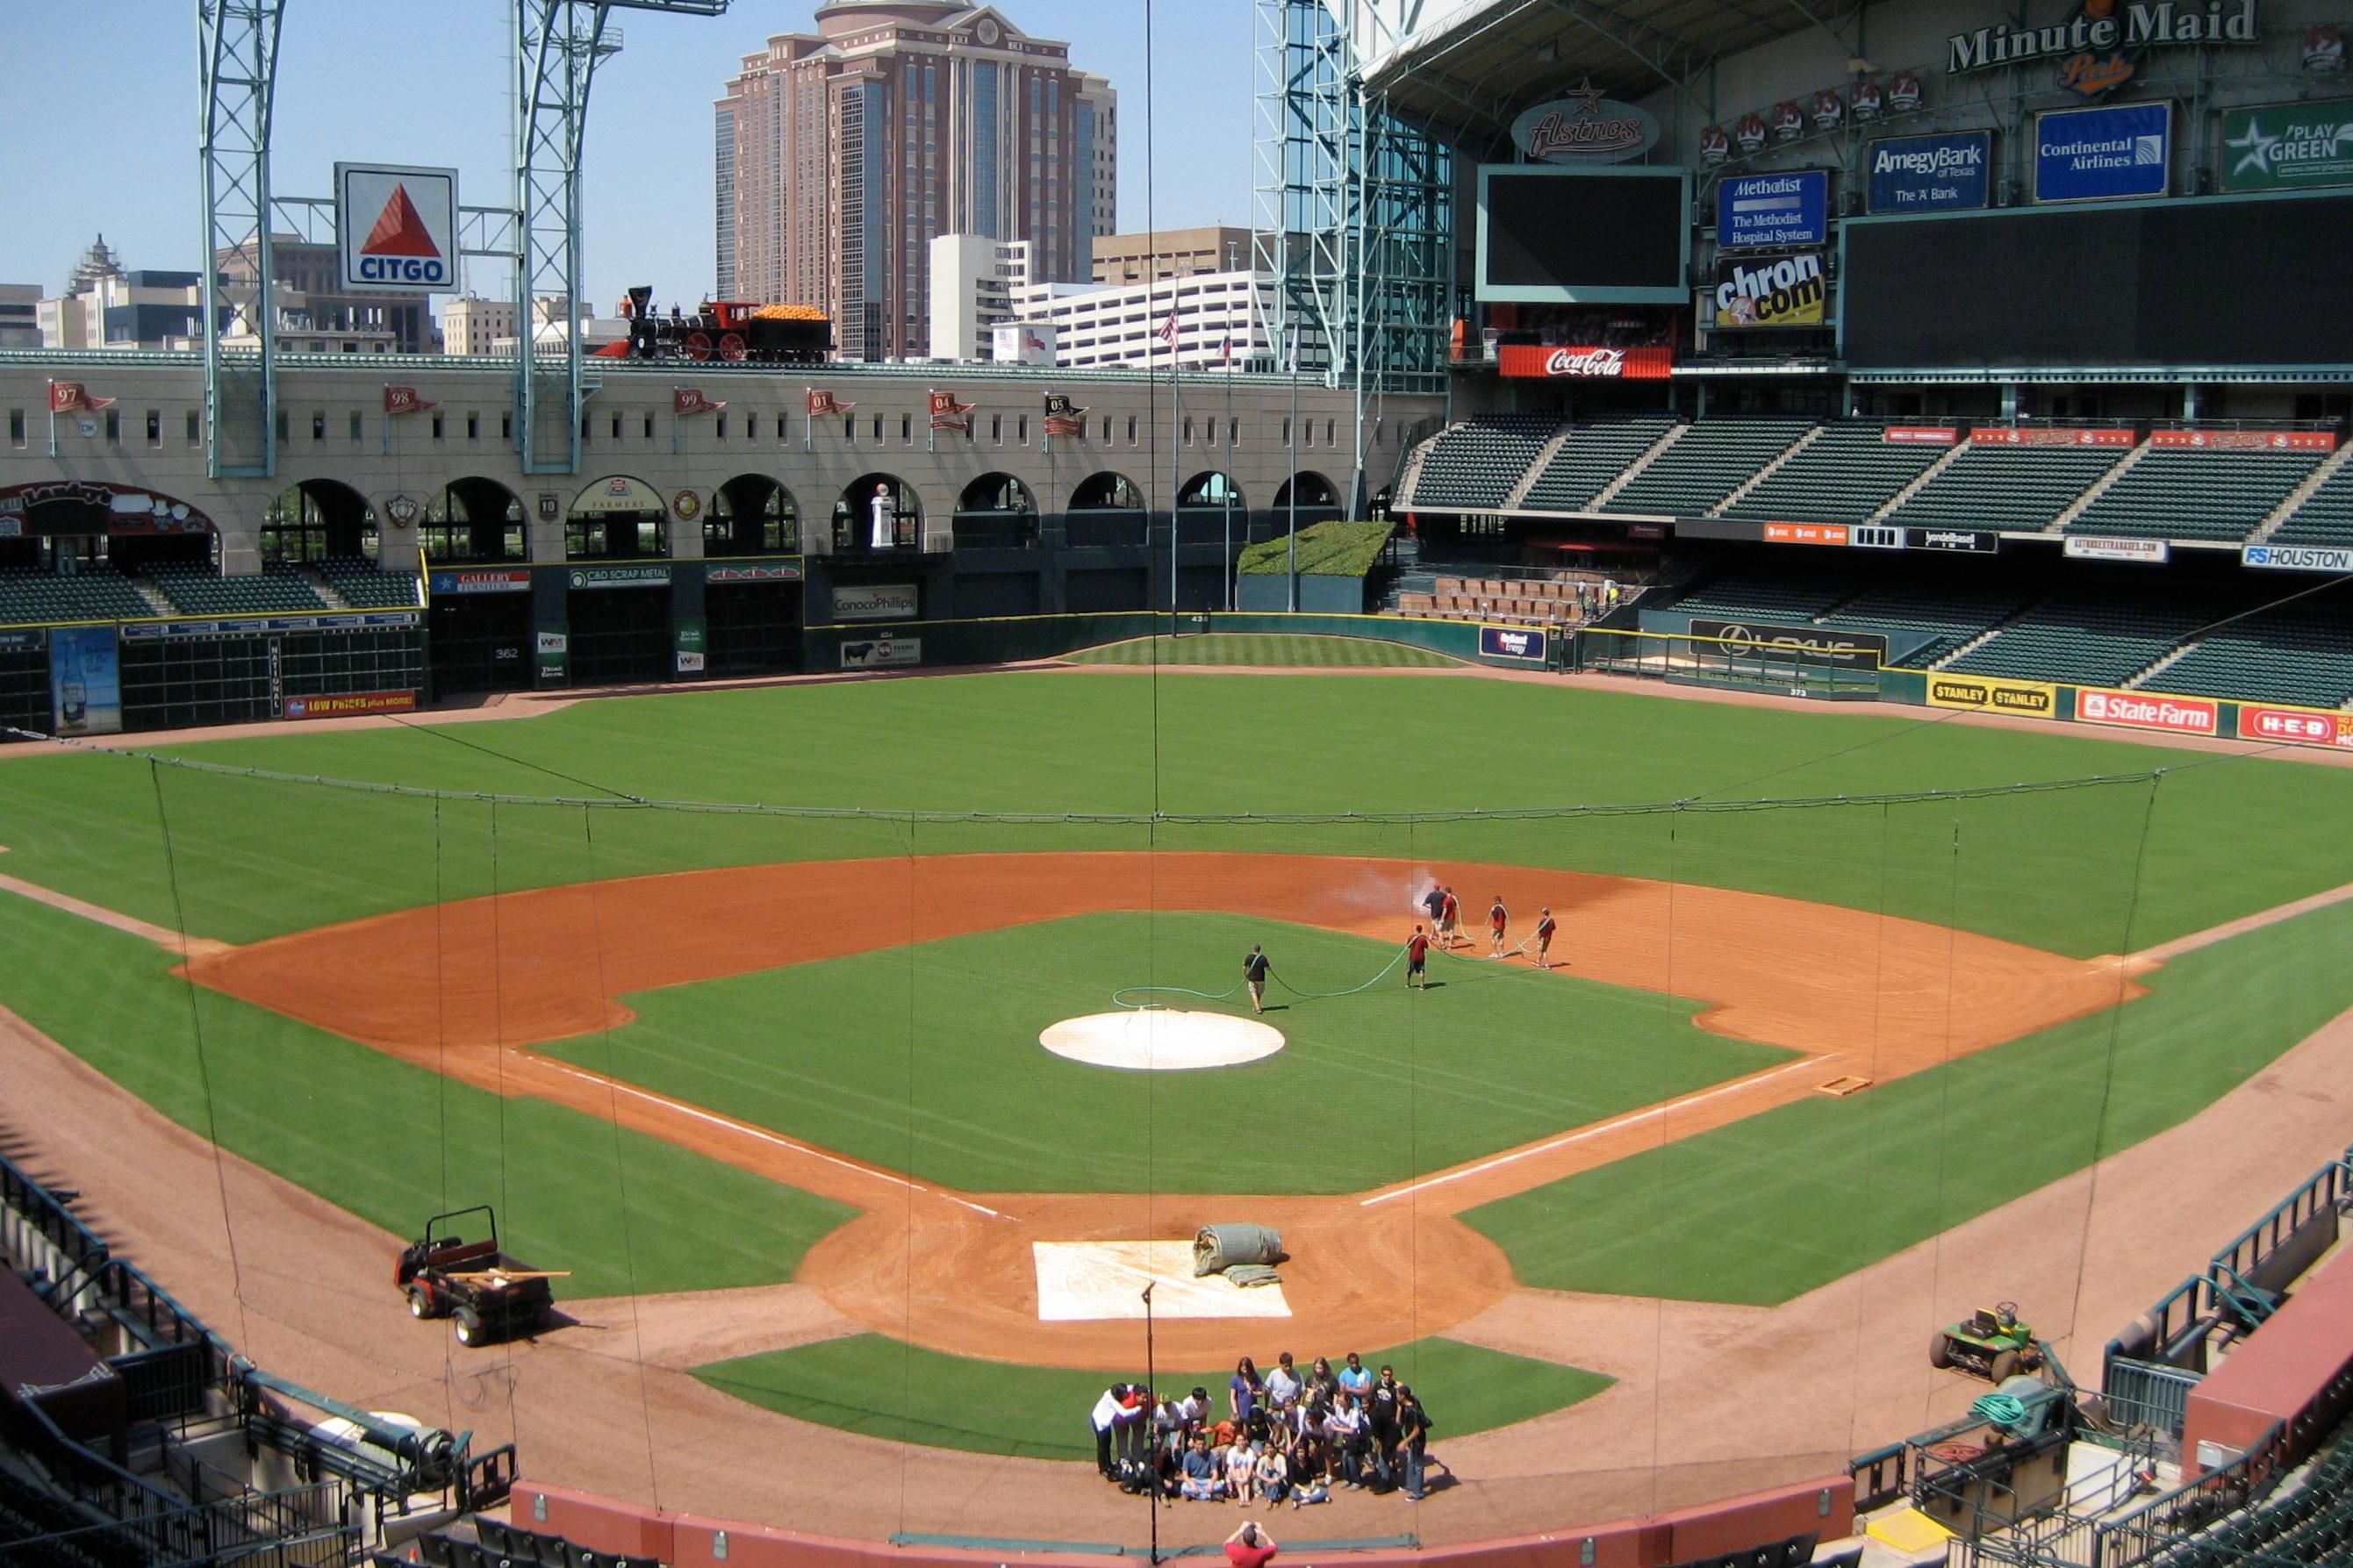 Catch a home run at Minute Maid Park, home of the Houston Astros.